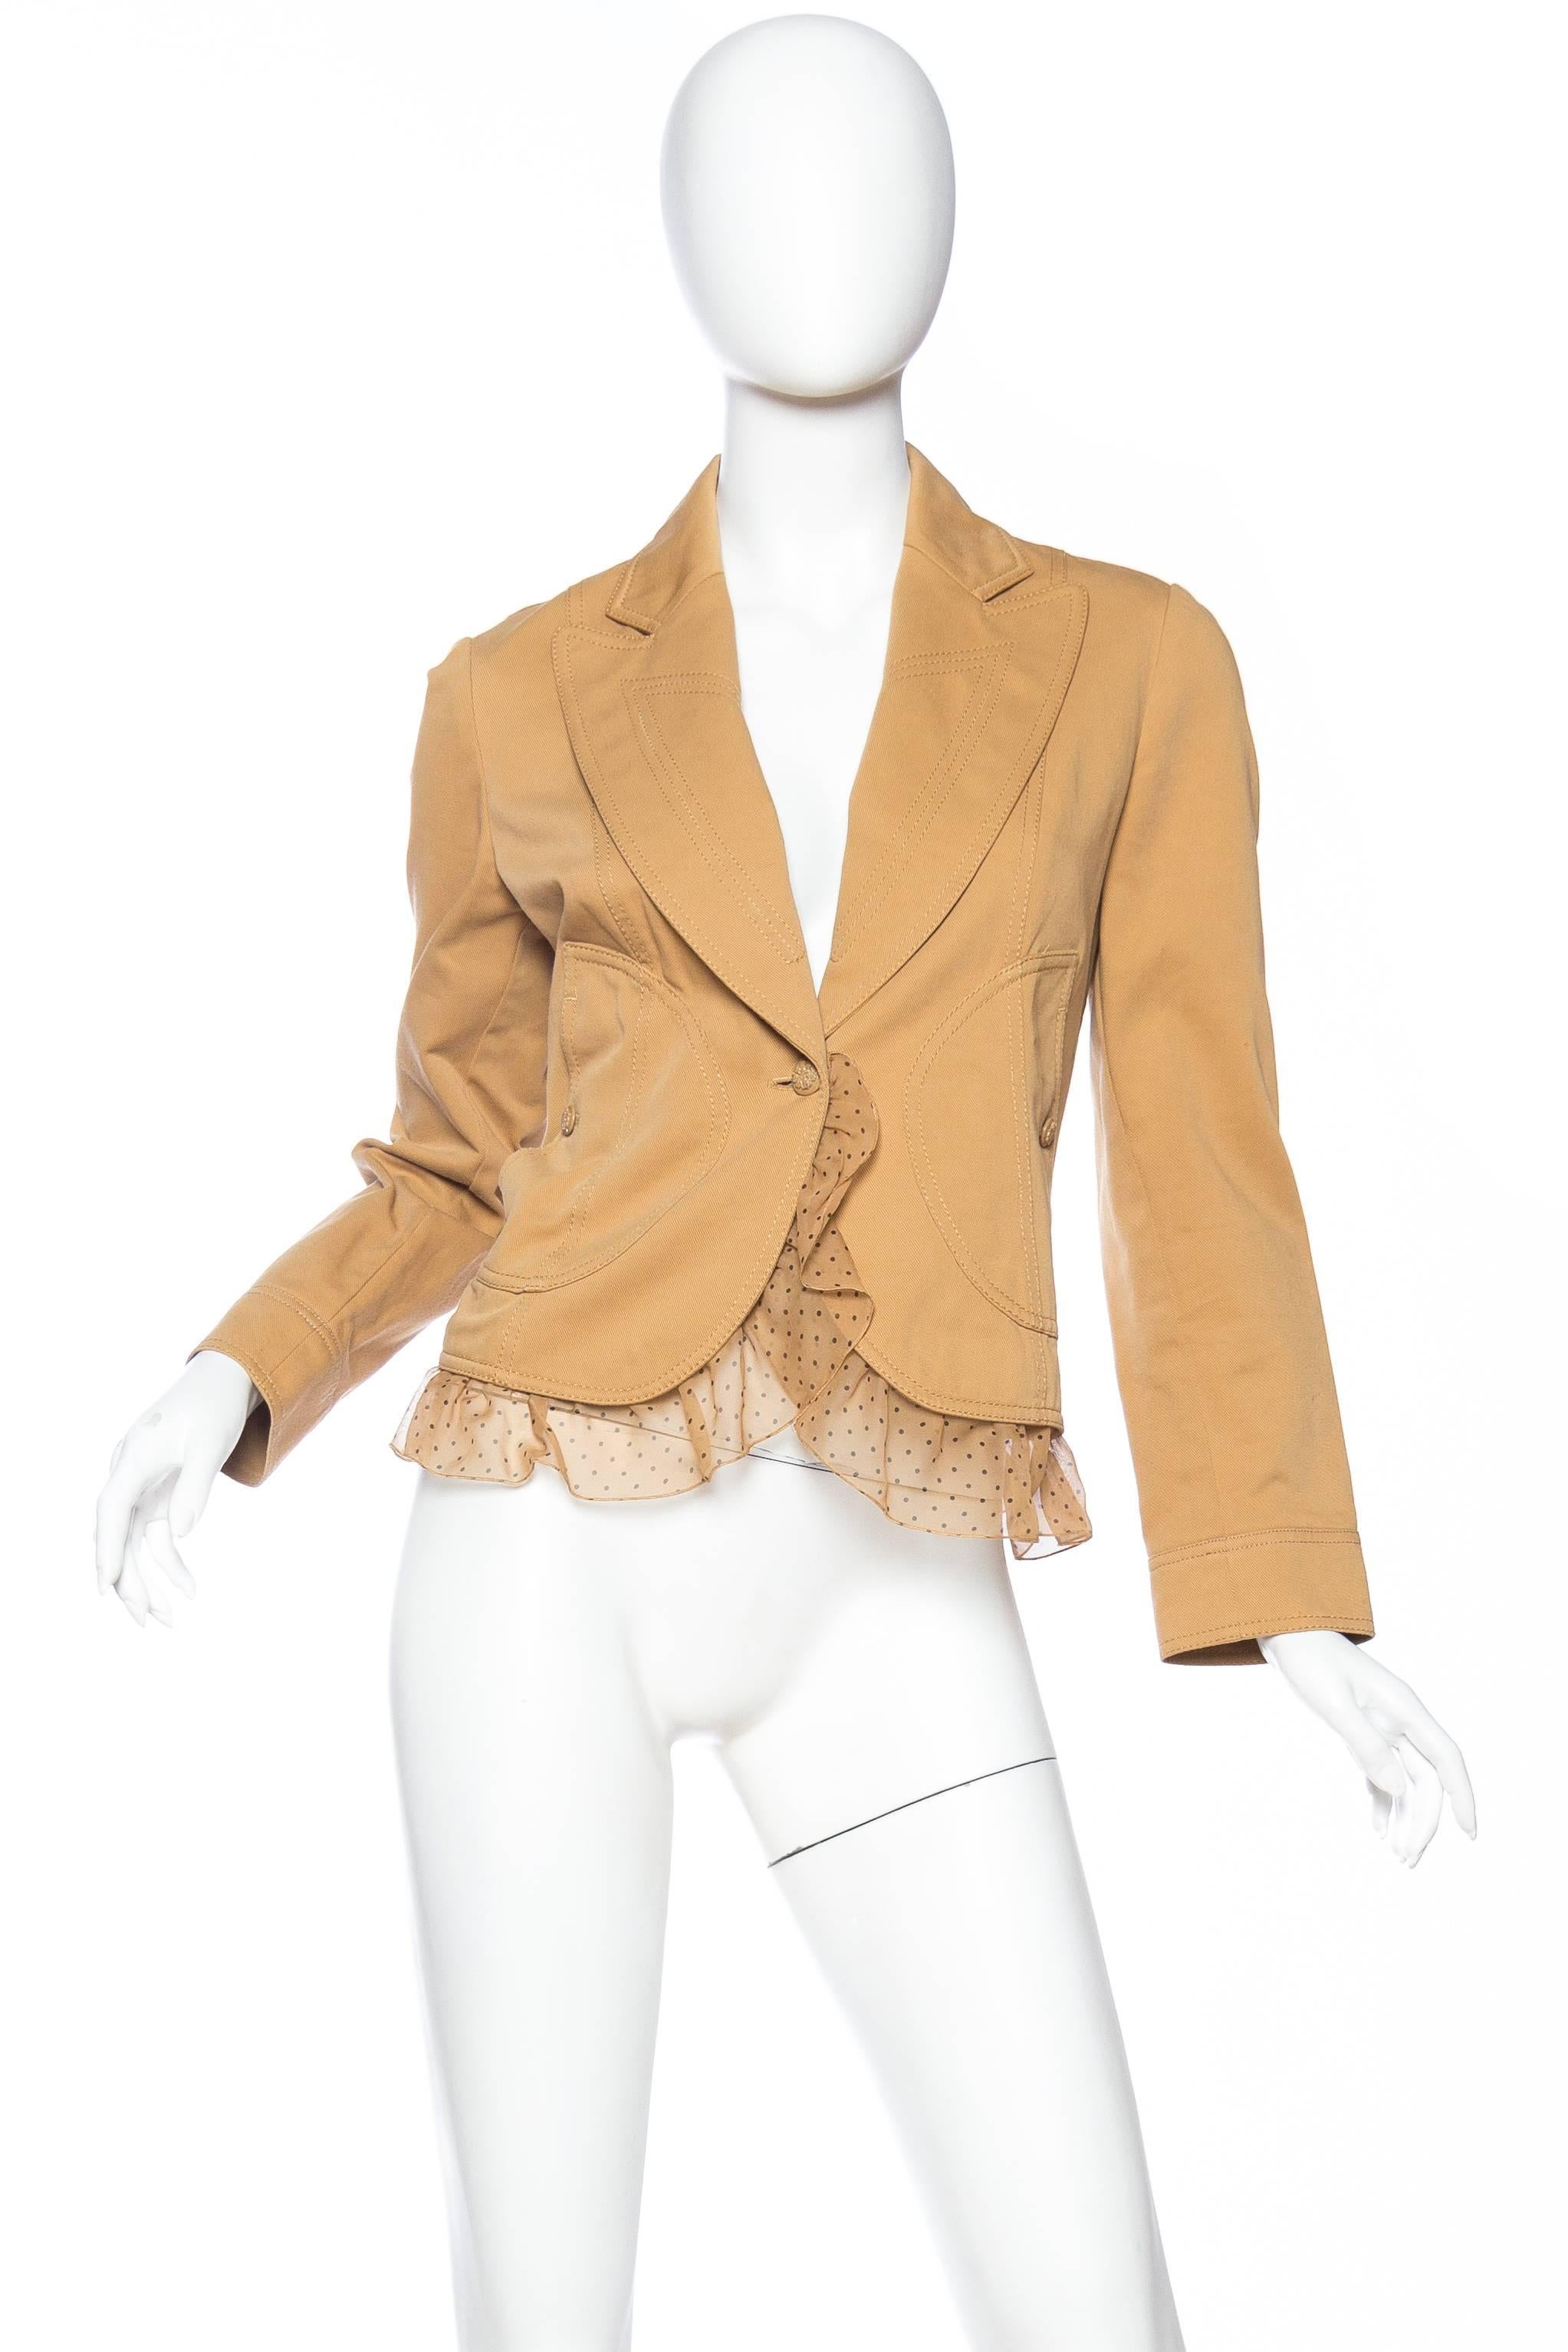 A great jacket to dress up a simple look with a touch of flirty romance.  Ruffle unbuttons from interior.